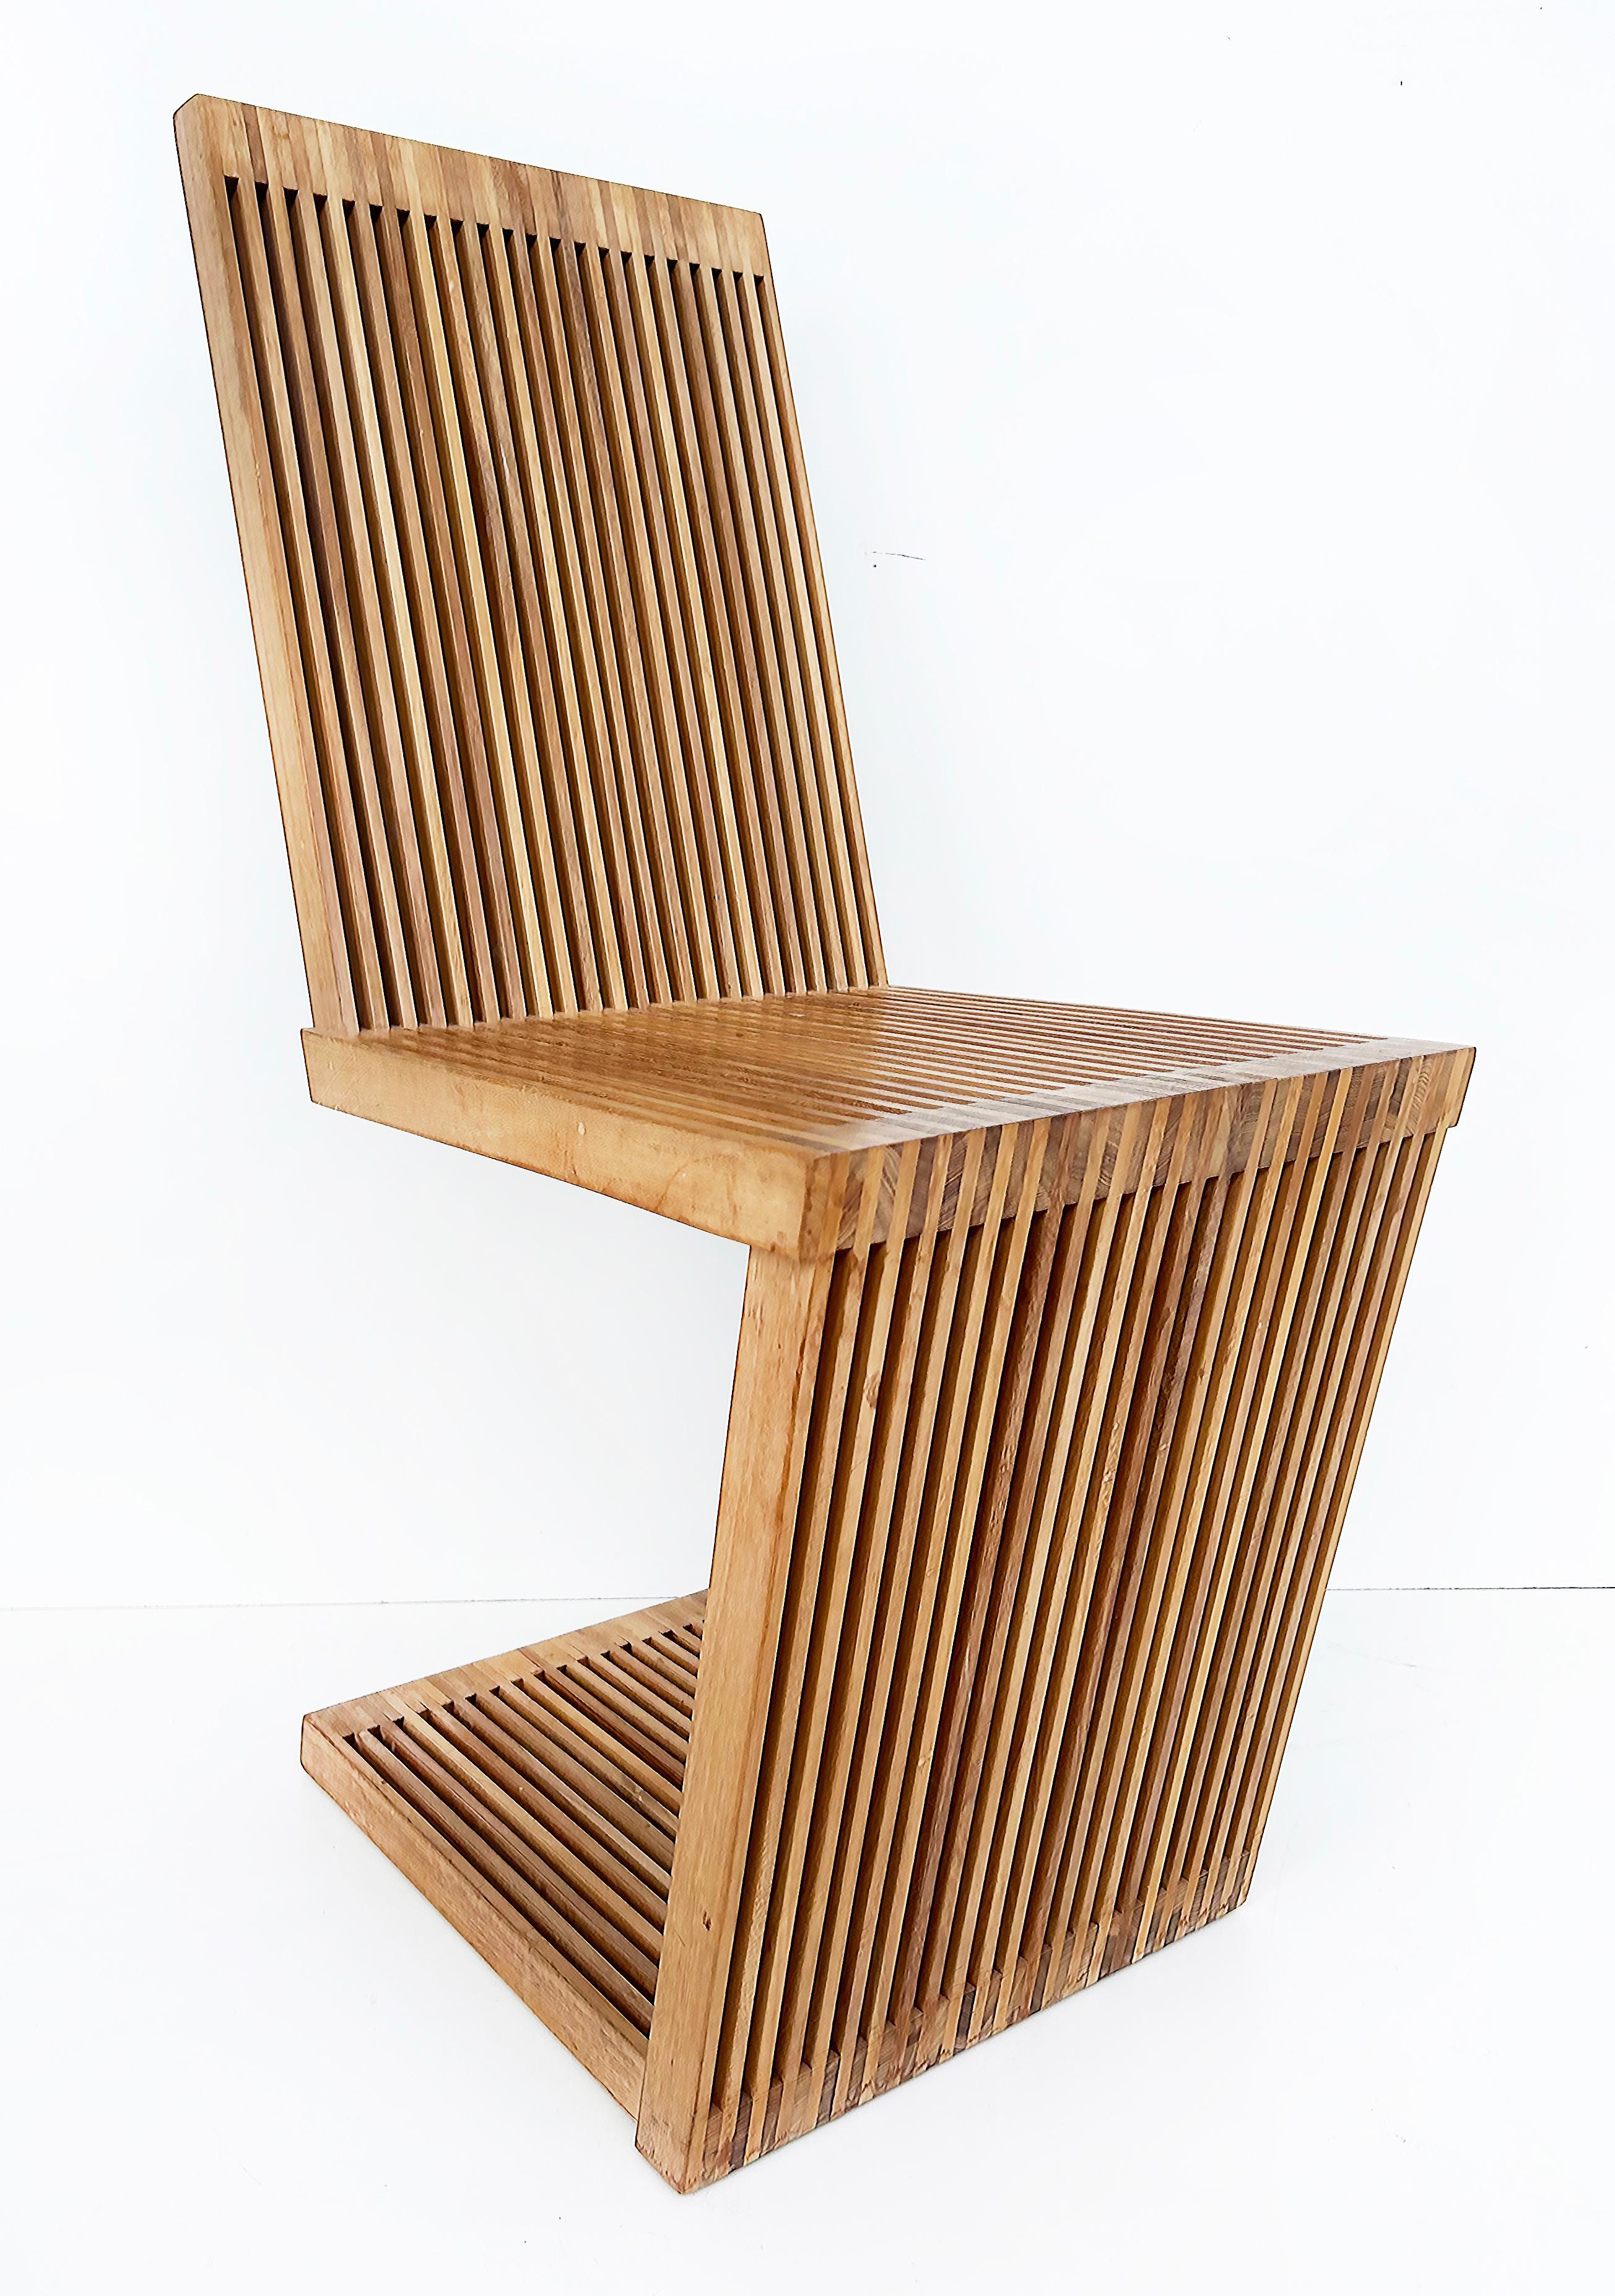 USA Slatted Wood Cantilevered Zig-Zag Dining Chairs, Set of 6

Offered for sale is a set of six slatted wood cantilevered dining chairs with meticulous and fine craftsmanship. These were acquired by the previous owner at a gallery in New York City